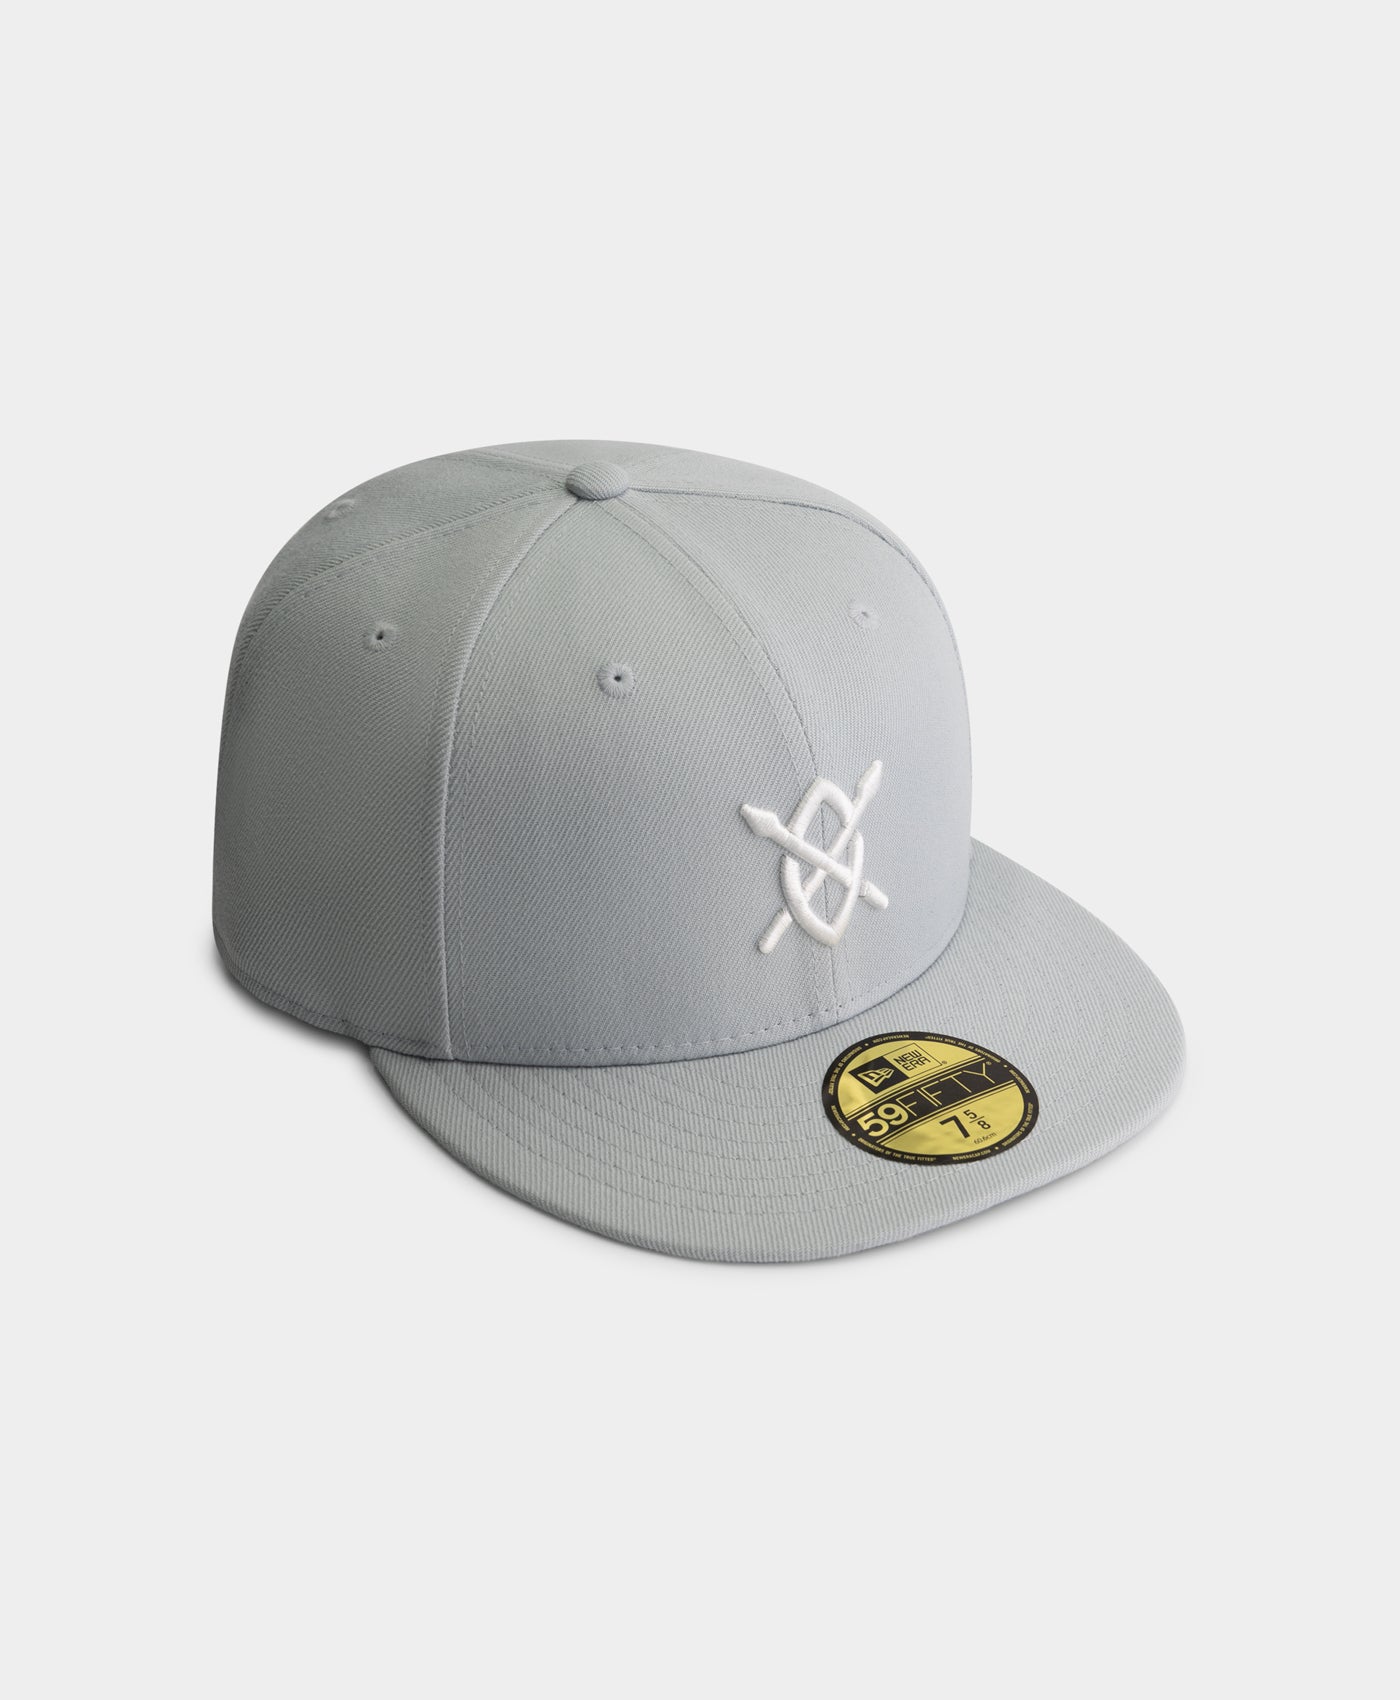 DP - Snow Grey Daily Paper x New Era 59FIFTY Fitted Cap - Packshot